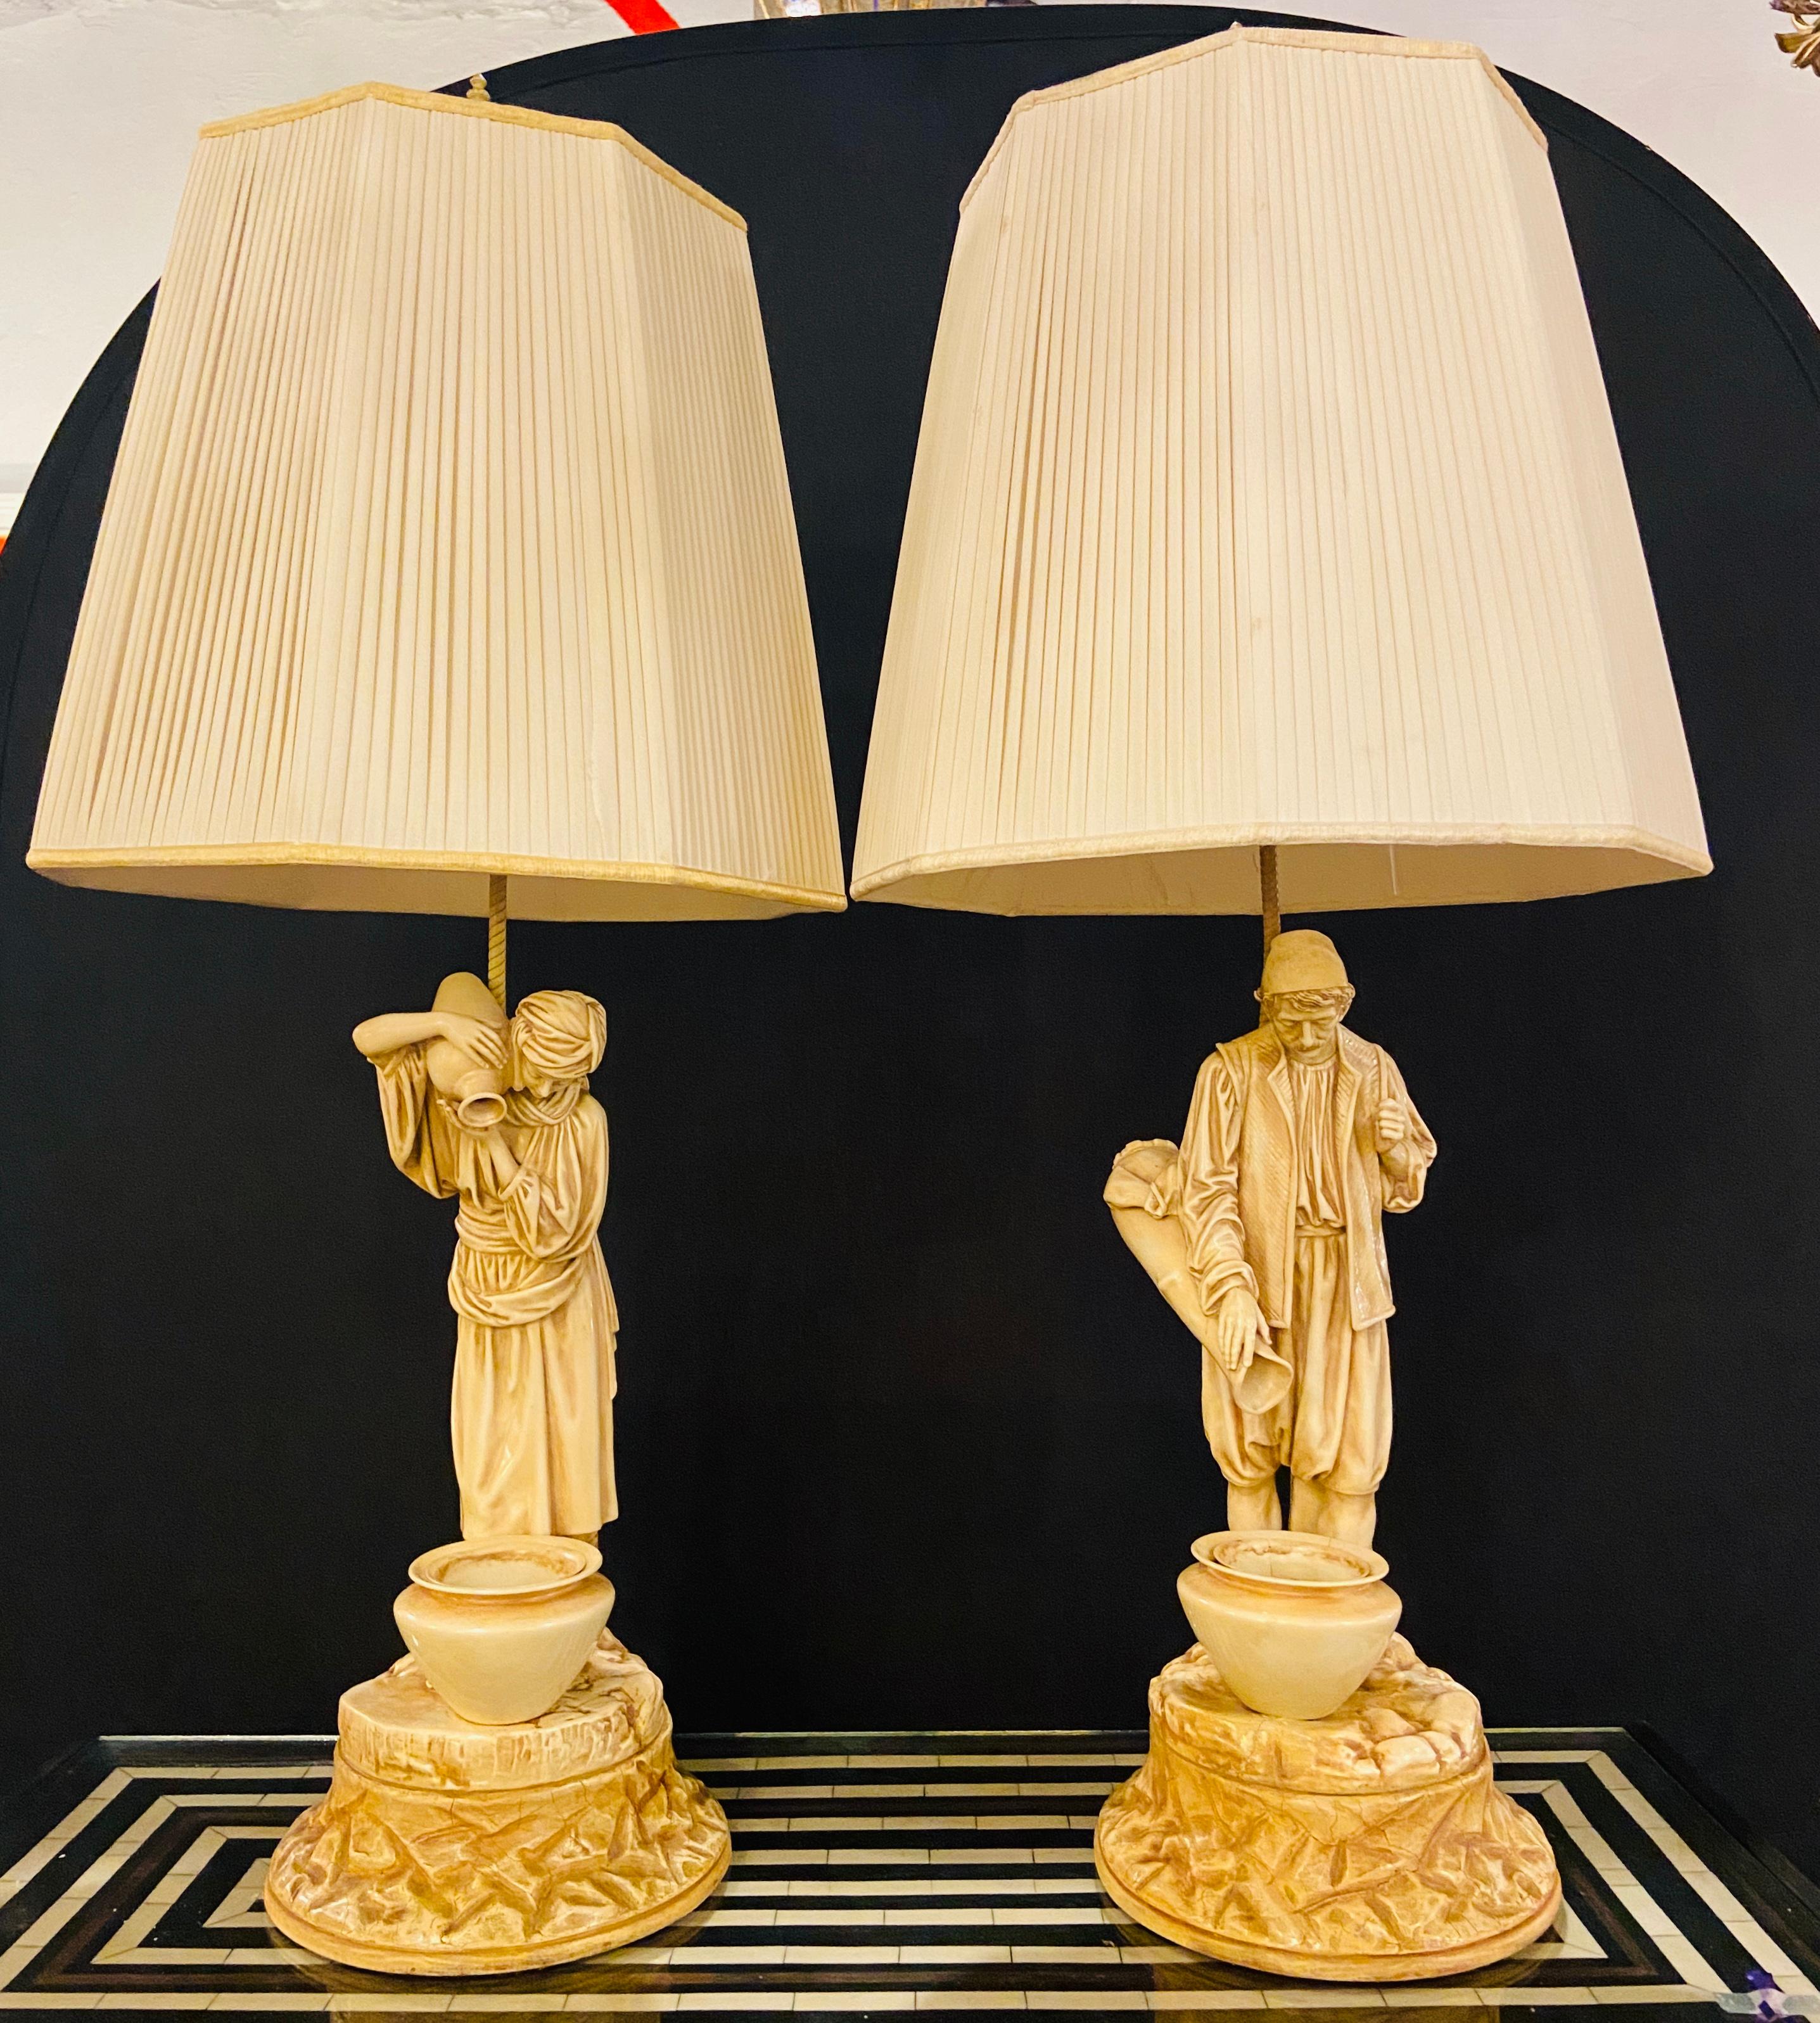 A pair of Mid-Century Water Bearers in a Finely Cast Porcelain Finish Table Lamps. This pair of water bearers of a man and woman carrying water pots features cast porcelain finish and pots with inserts. The handmade lamps are finely handcrafted and